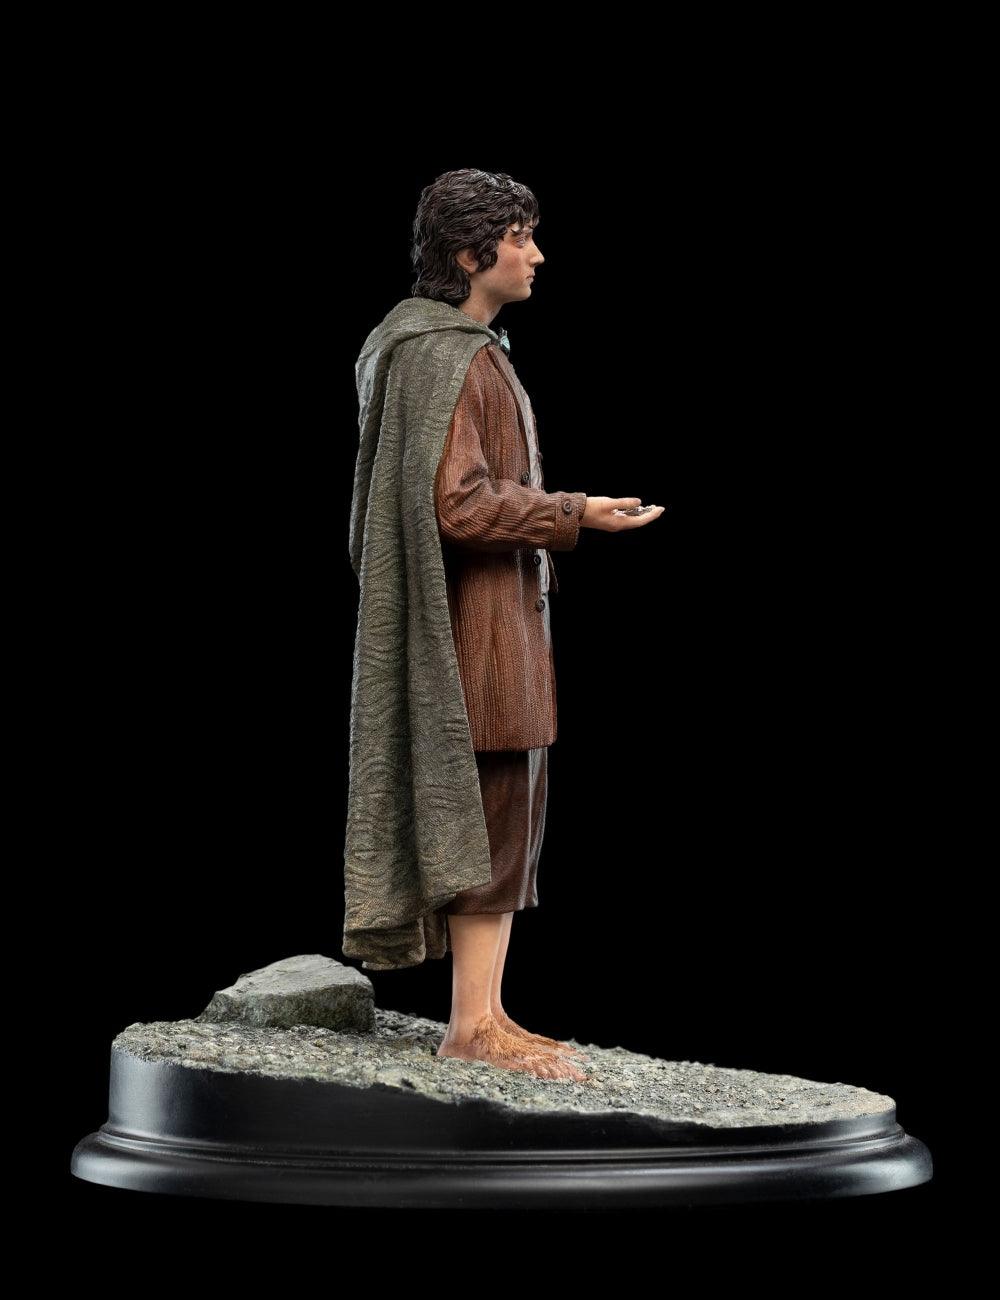 WET04156 The Lord of the Rings - Frodo Baggins, Ringbeaer Classic Series 1:6 Scale Statue - Weta Workshop - Titan Pop Culture